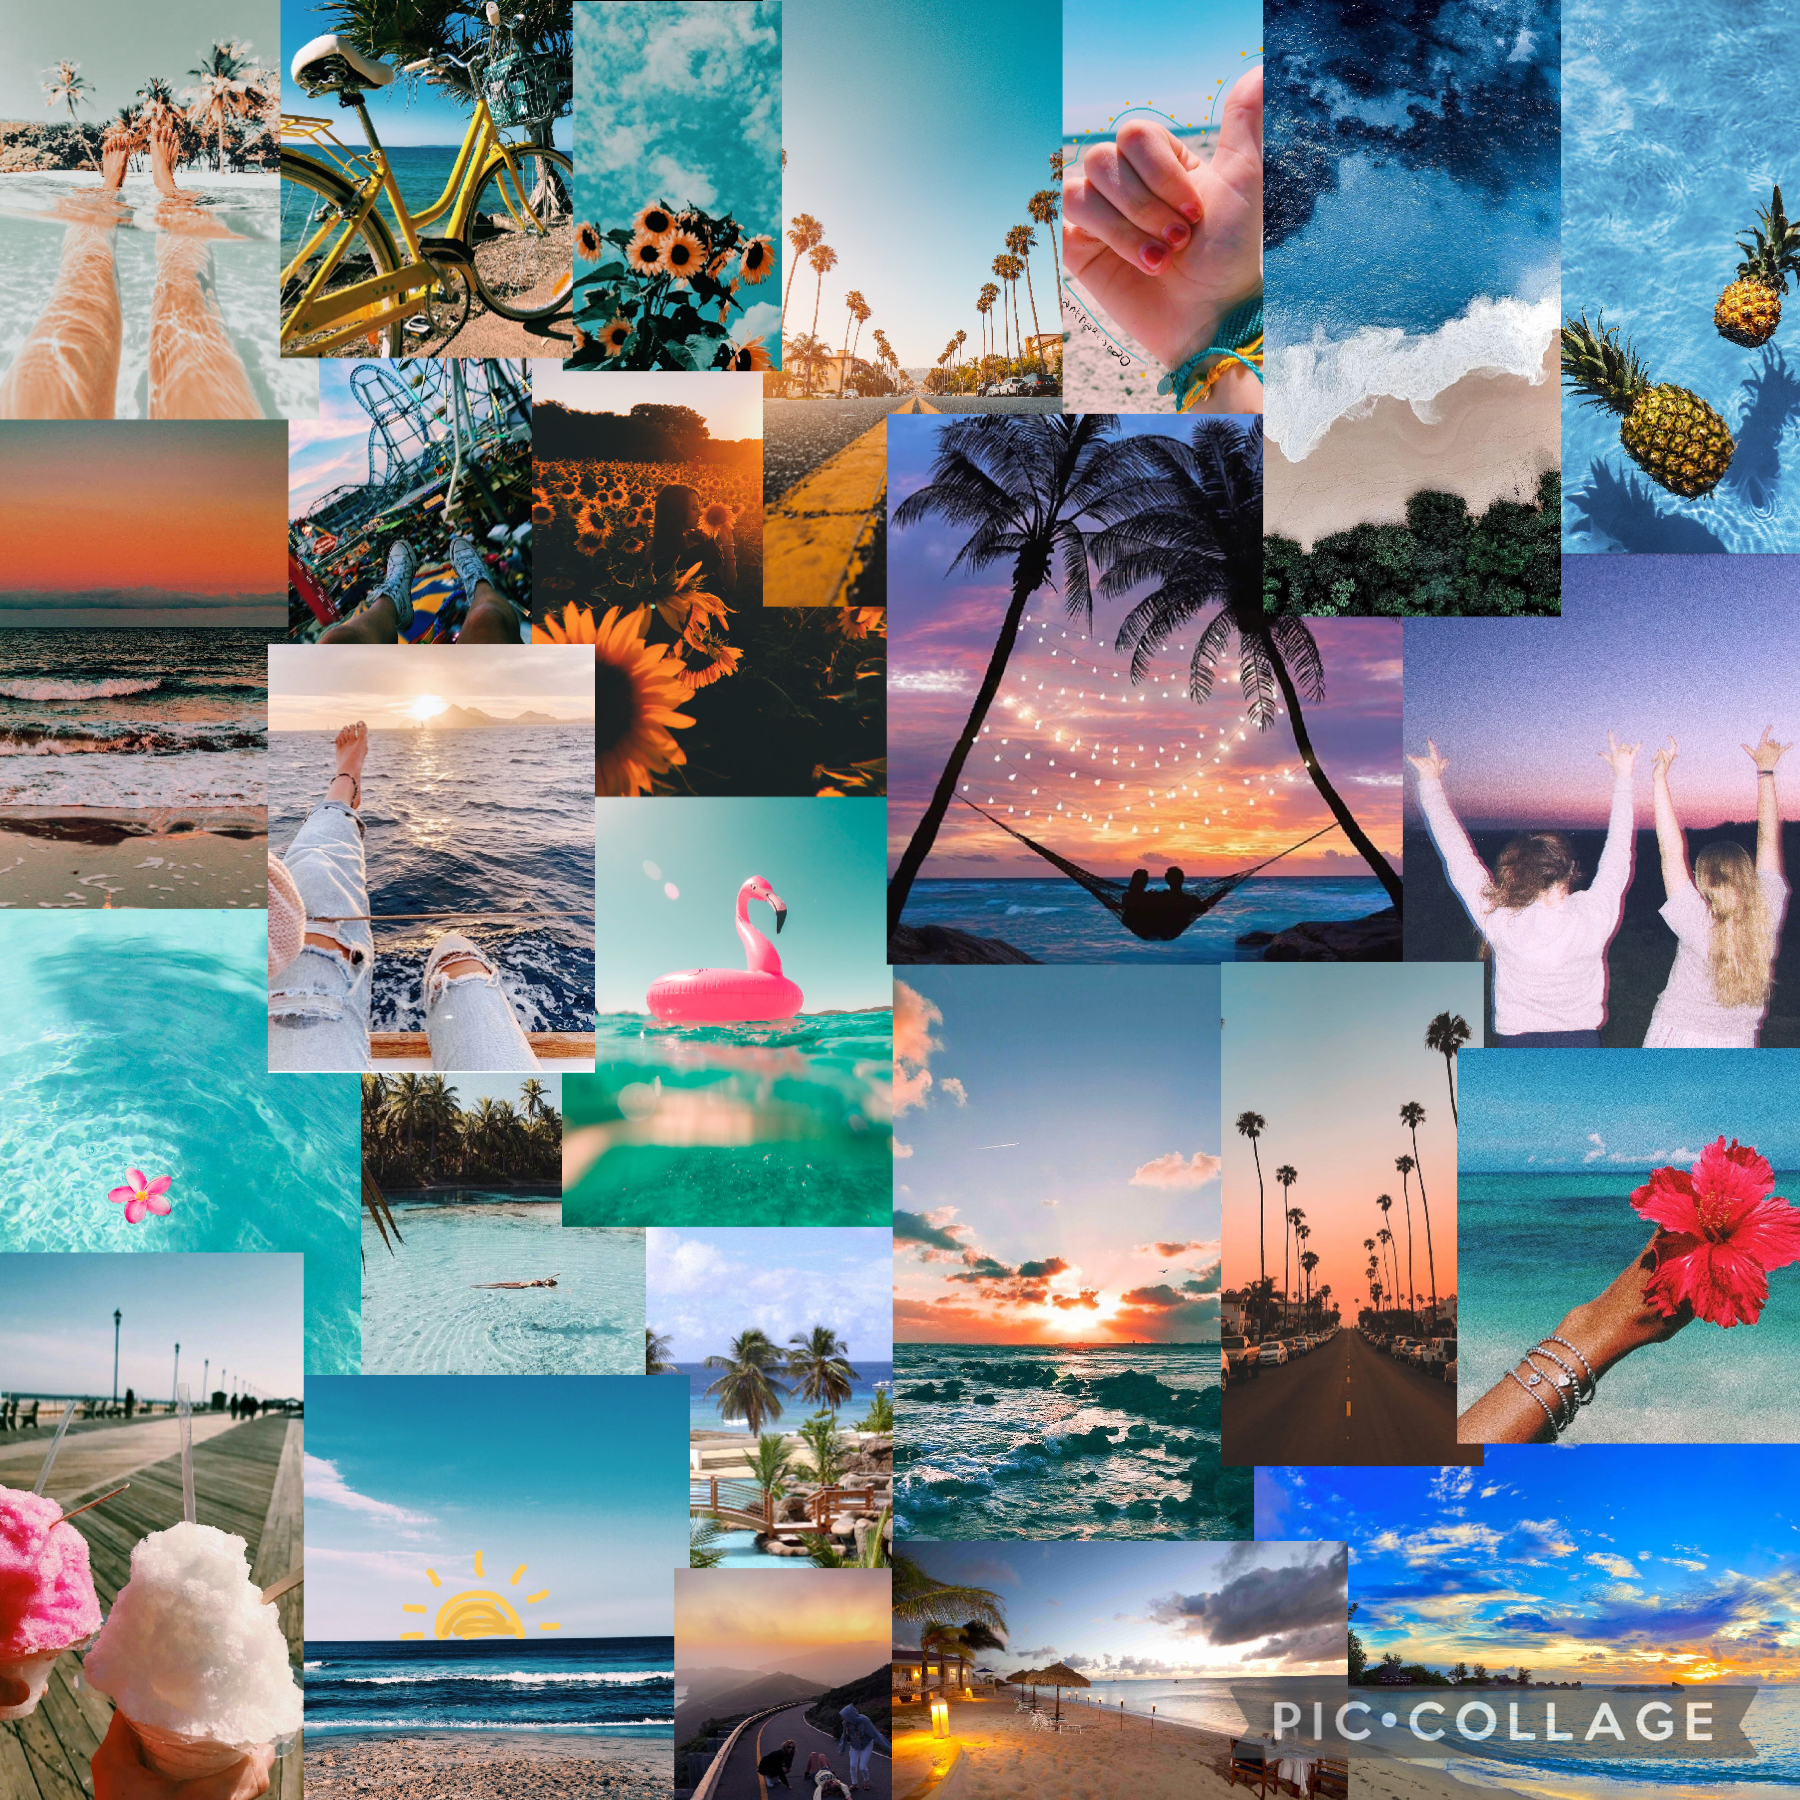 SUMMERS ON THE WAY GUYS so excited just letting you know comment on this post to enter the aesthetic collage giveaway tell me your aesthetic and I will pick on person to make a collage for also whoever comments on my post will get a follow back if I am  n